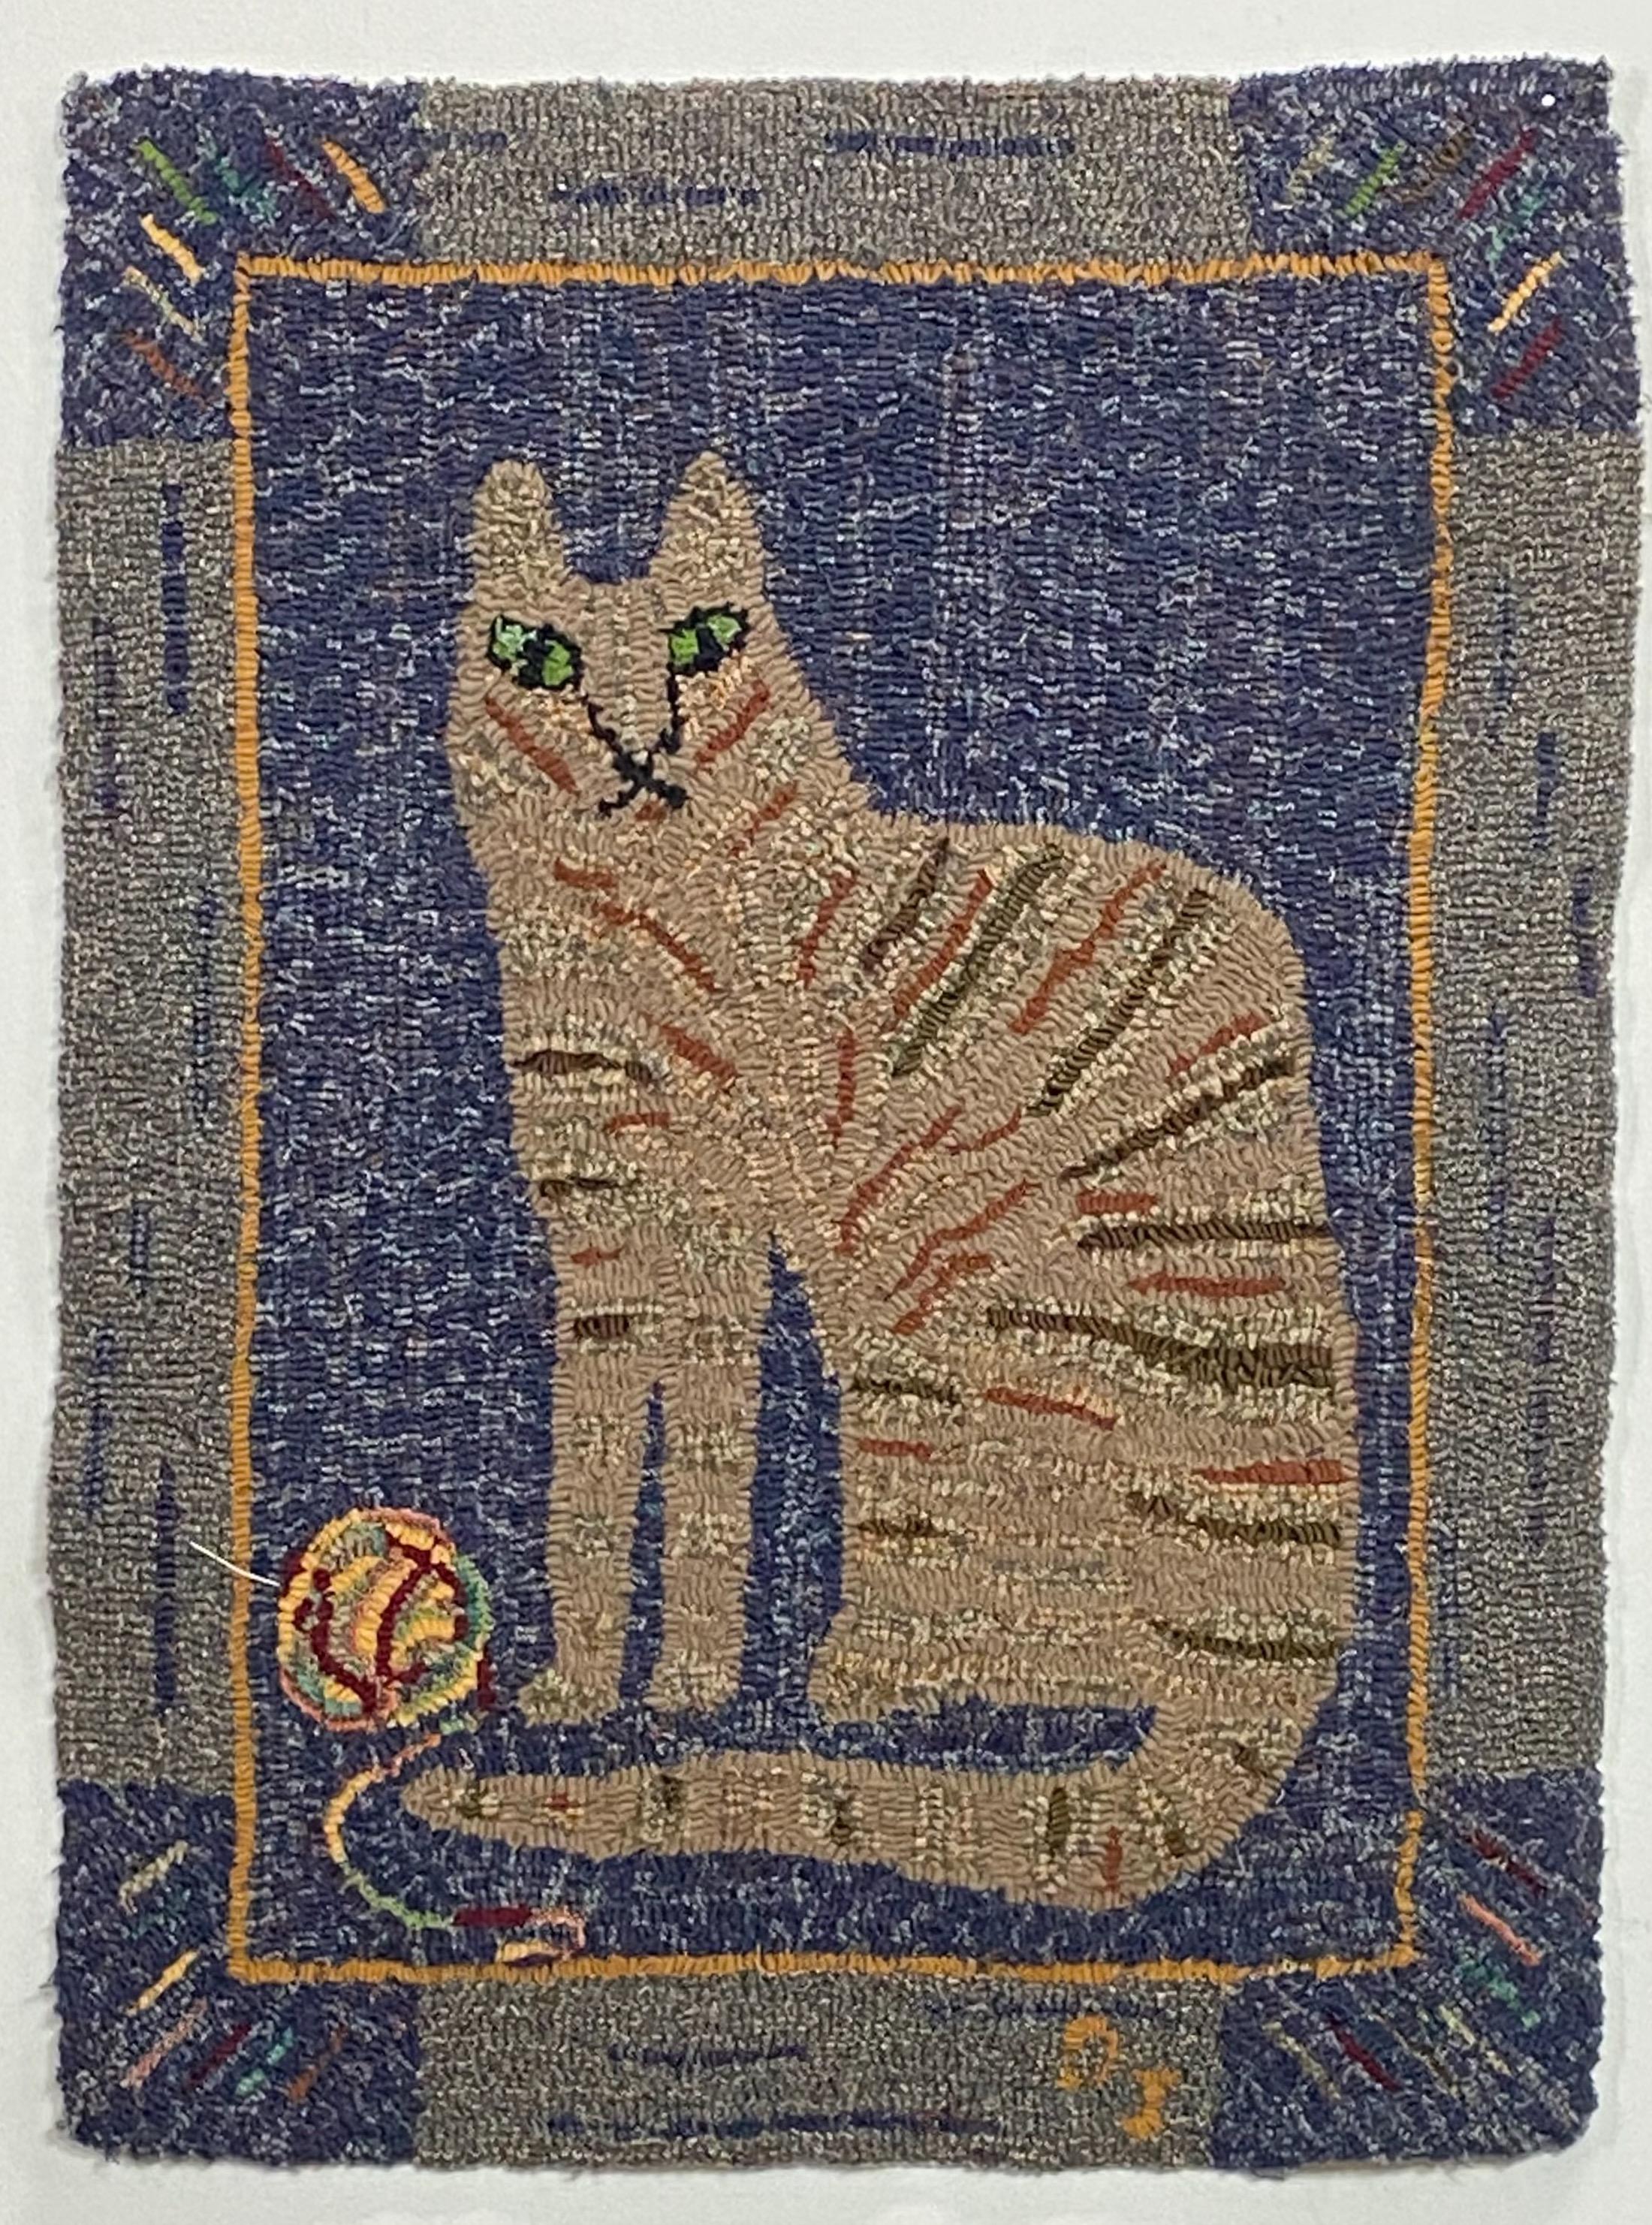 Charming antique Folk Art hooked rug or wall hanging of an expressive cat with a ball of yarn.
American, early 20th century.
Overall good condition, there are 3 loop missing in the initials in the lower right and a number of loops missing in the